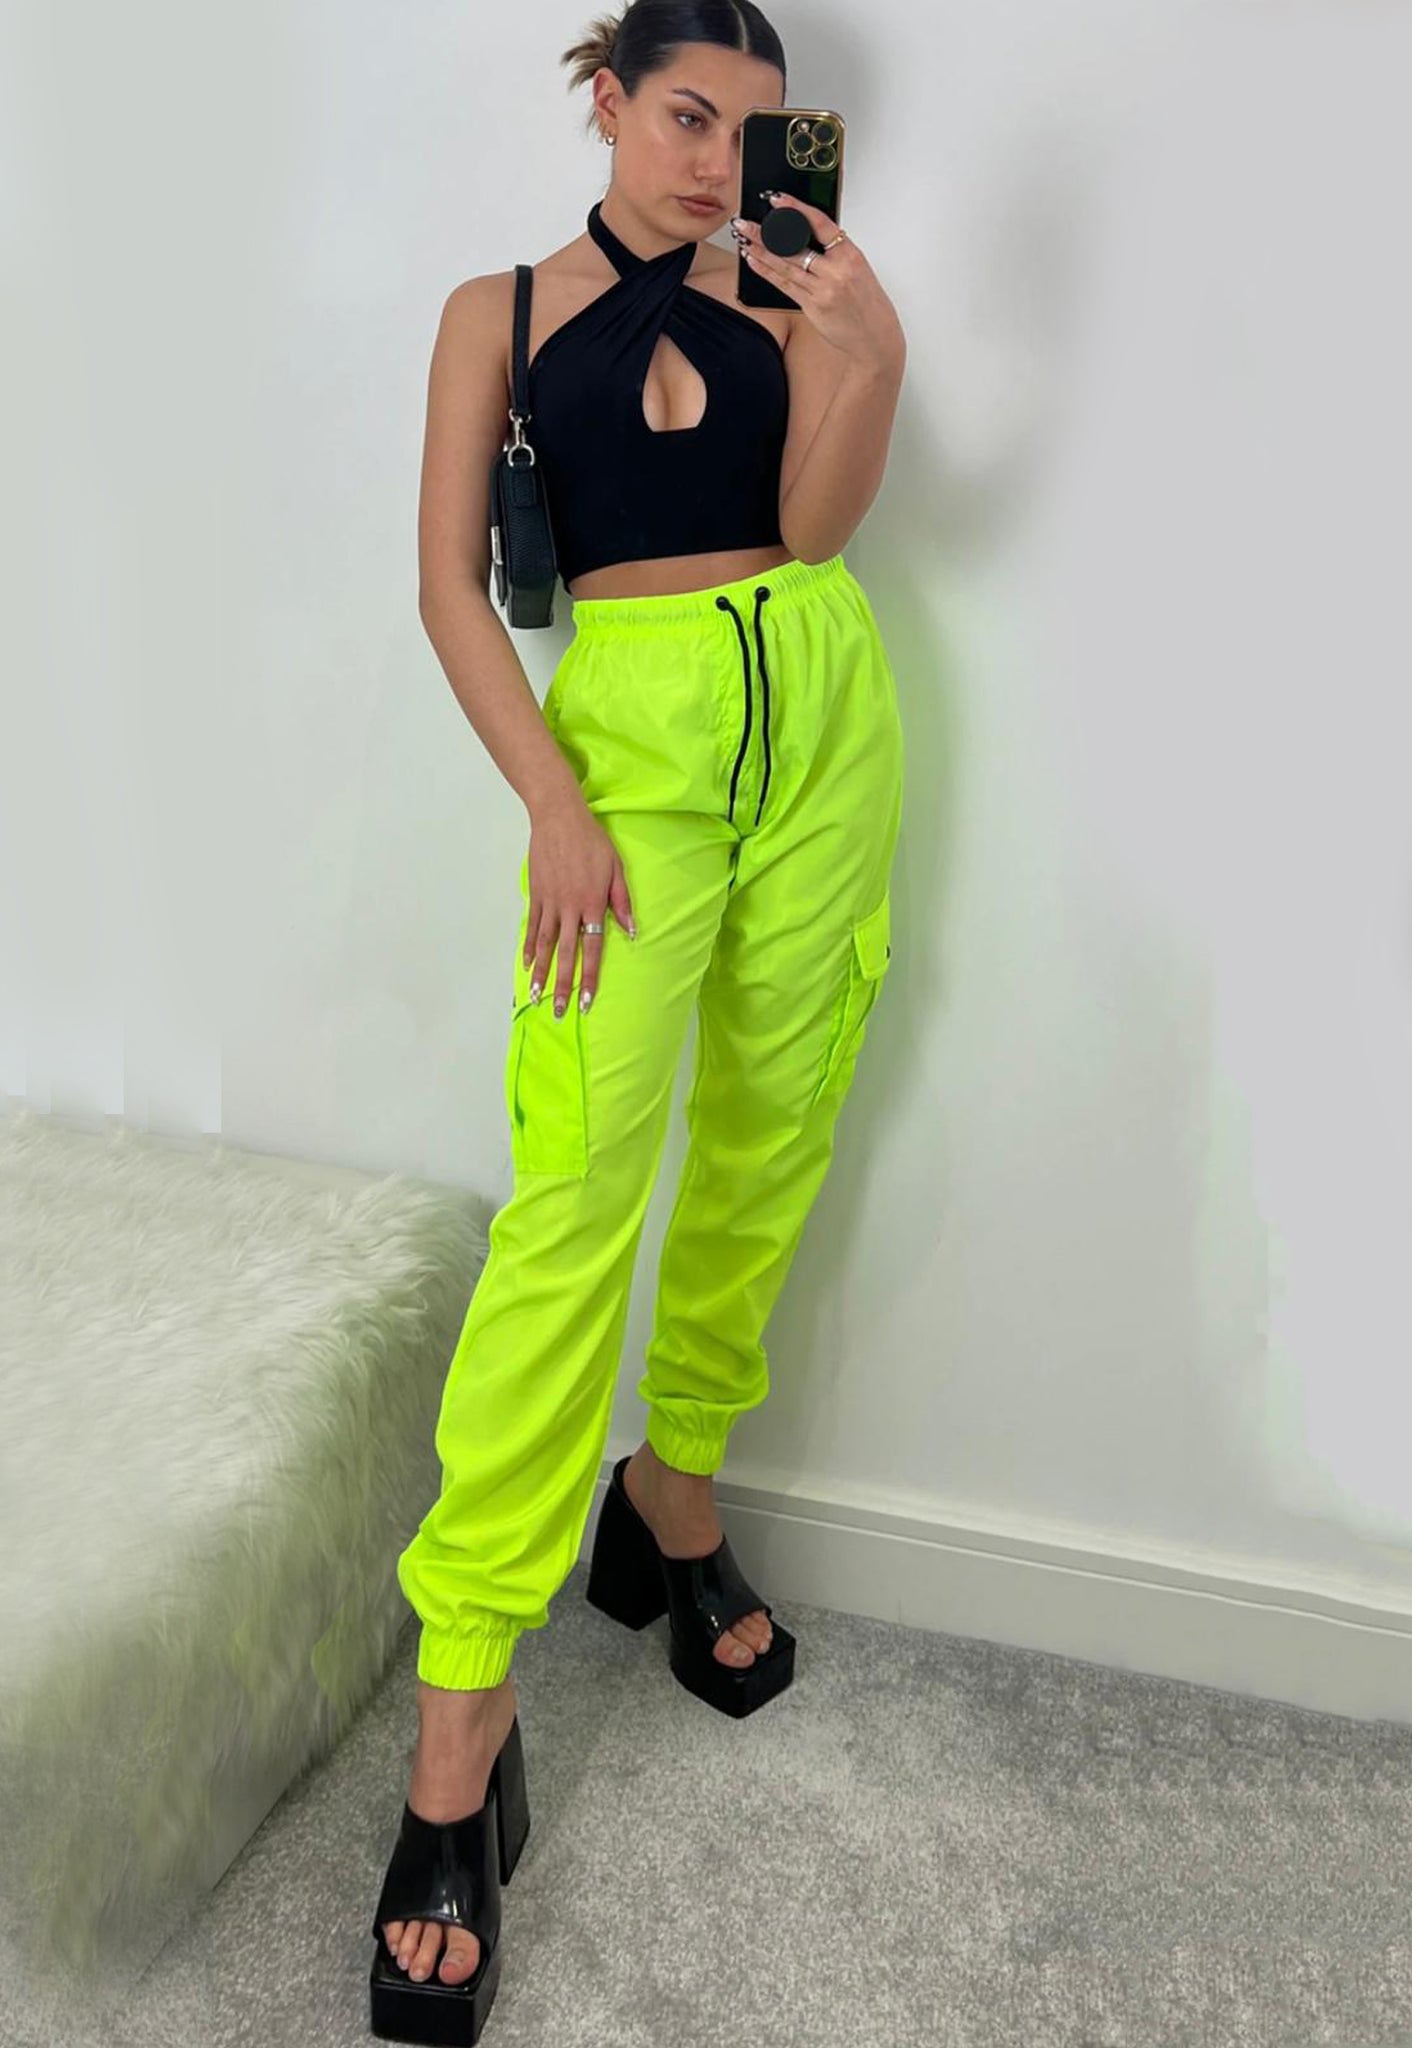 Dallas Fringed Trousers in Neon Yellow – L.O.M